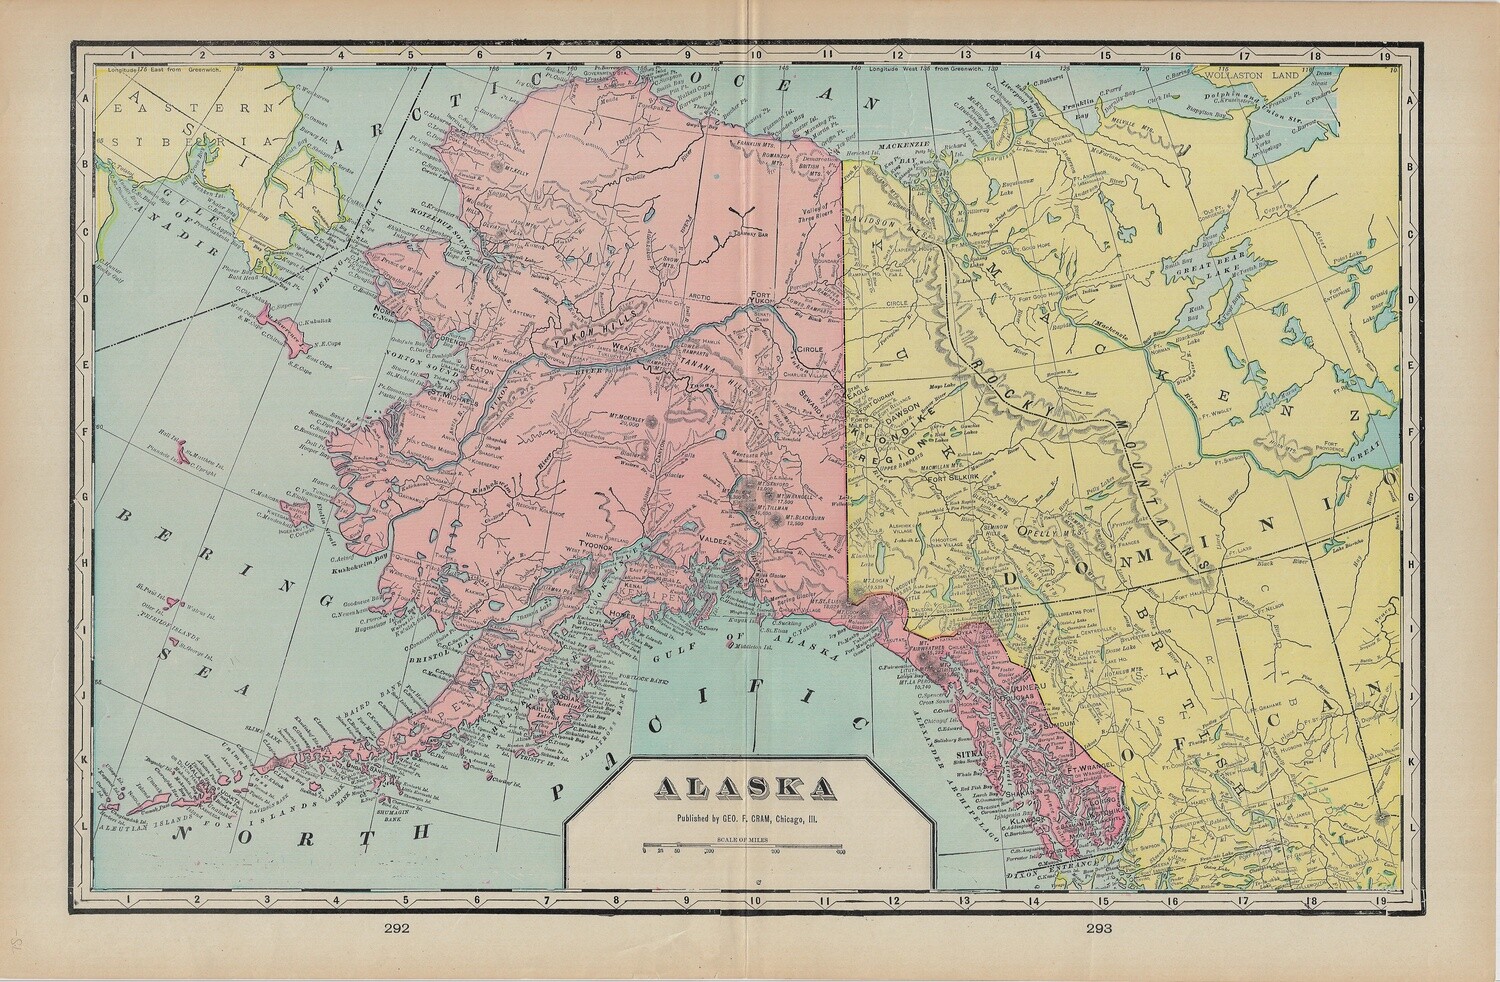 1900 Map of Alaska by Geo.Cram in Color Lithography